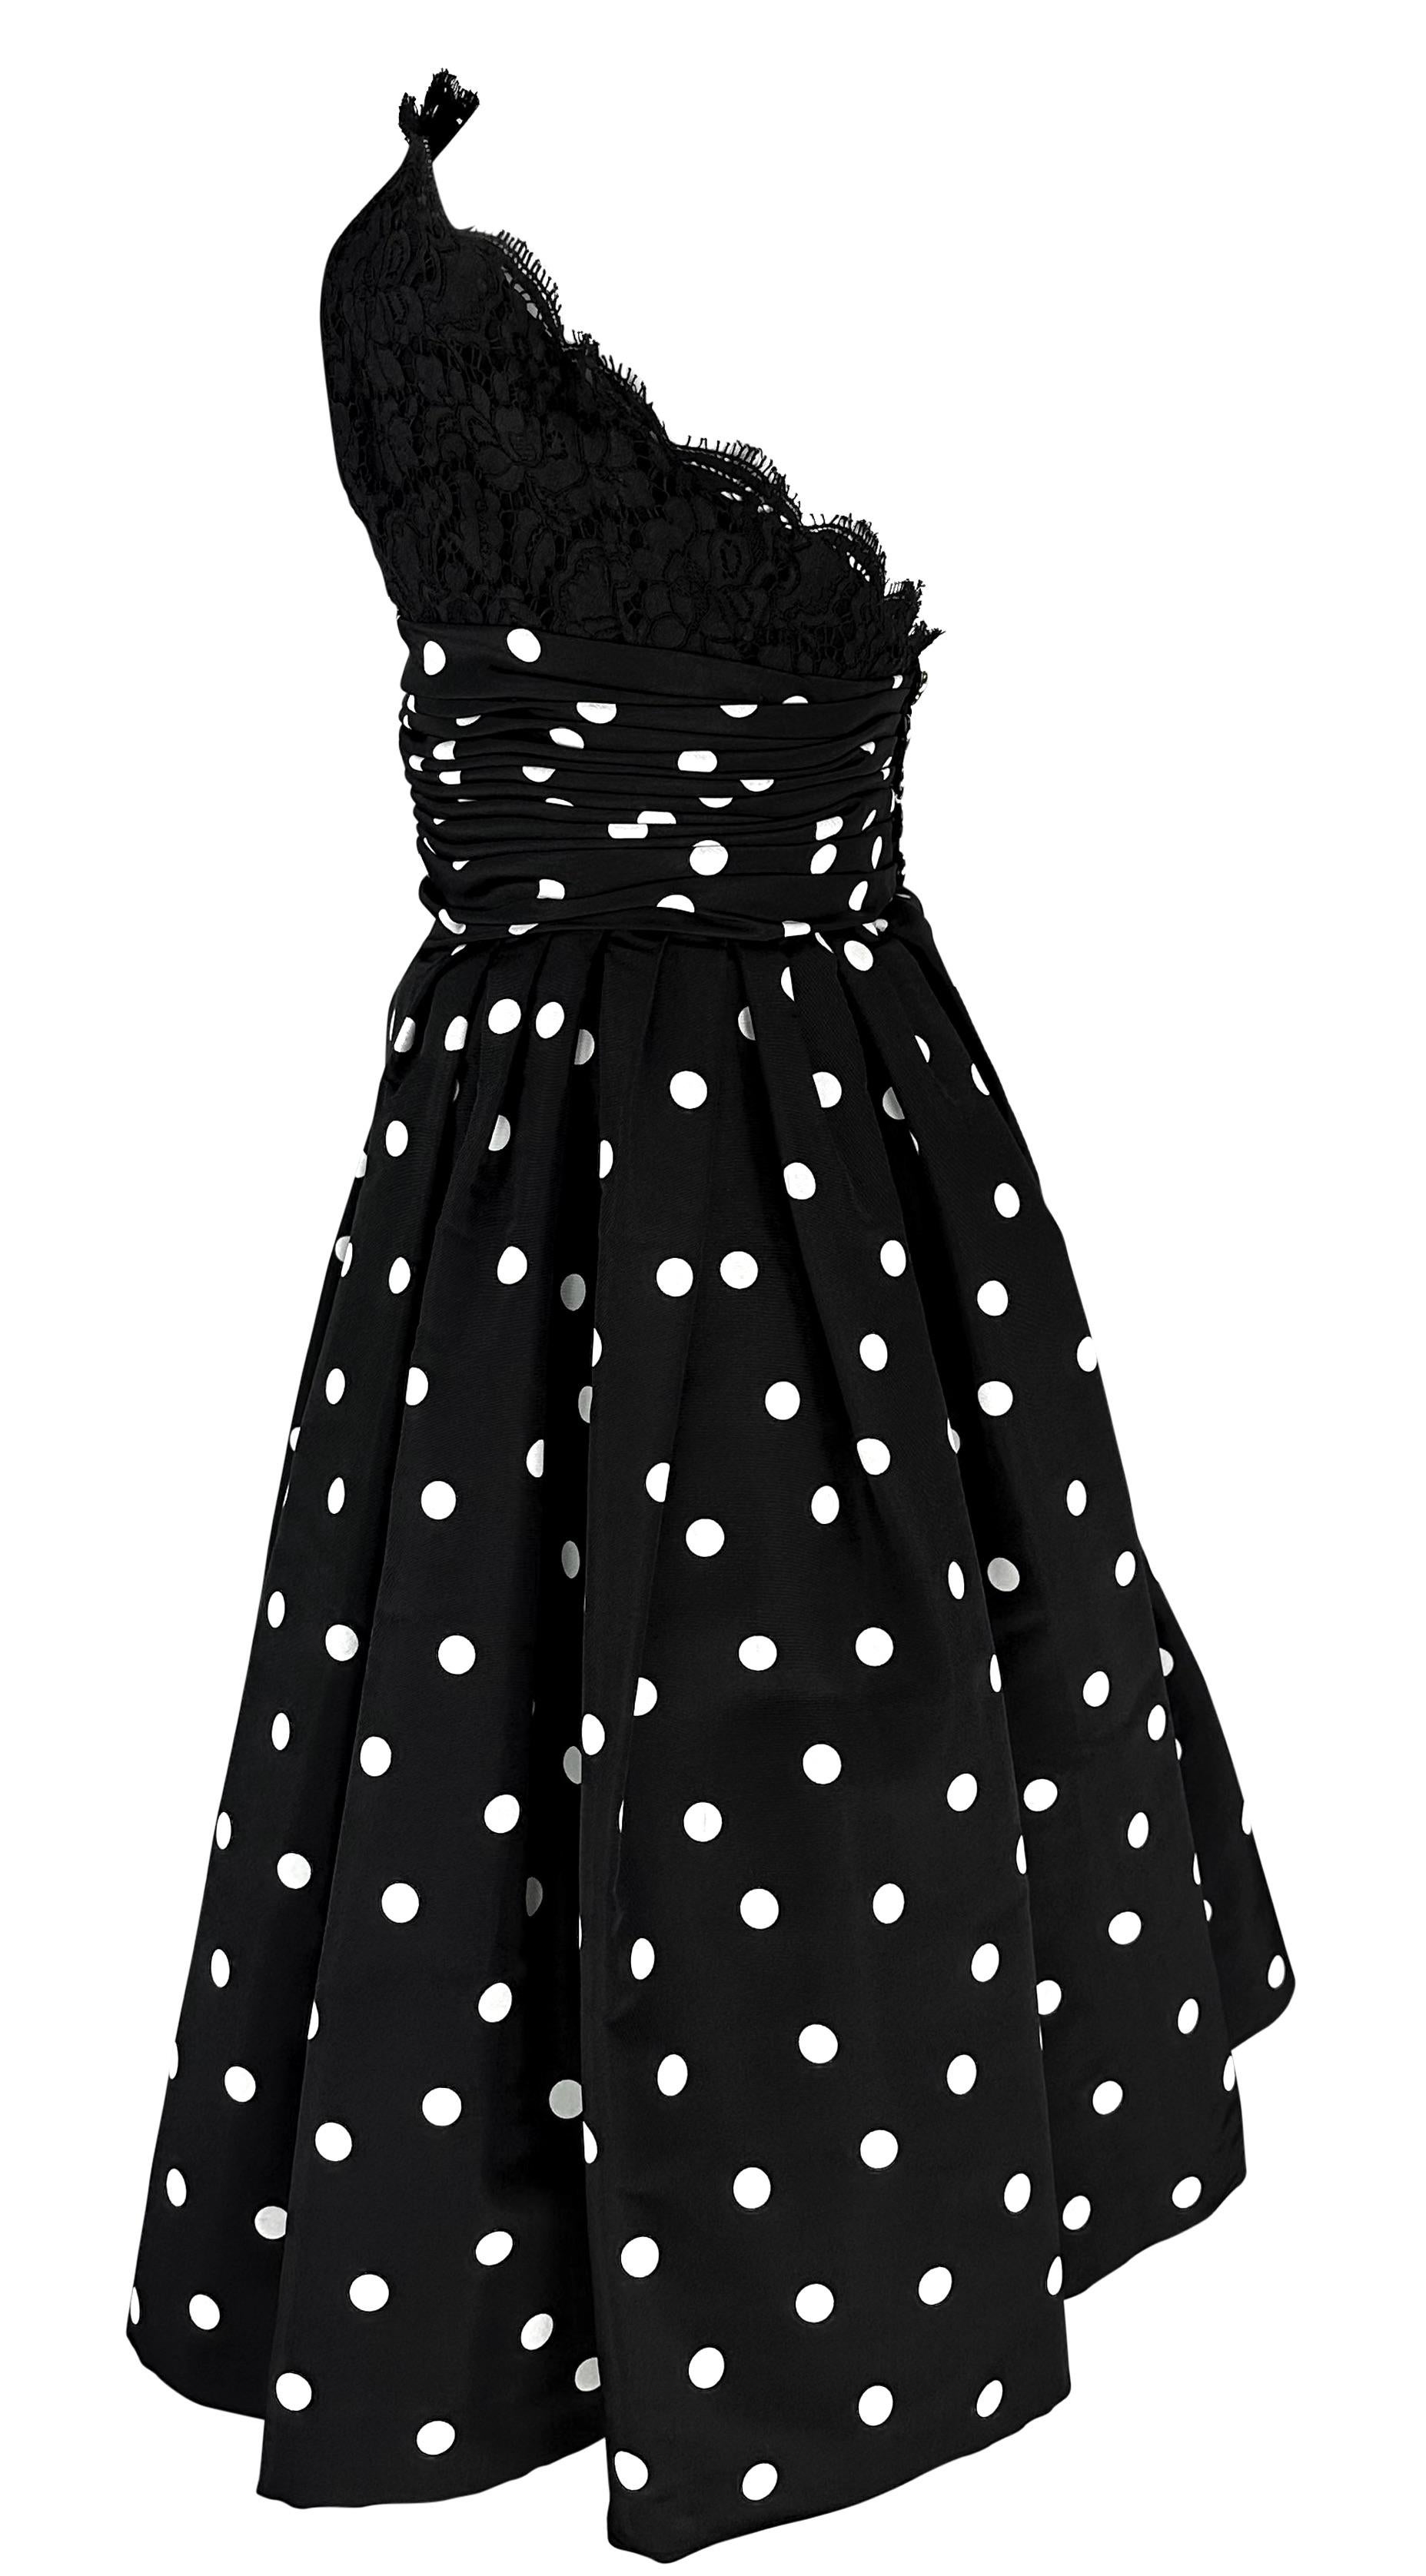 Women's  S/S 1988 Chanel by Karl Lagerfeld Runway Polka Dot Lace Strapless Flare Dress For Sale